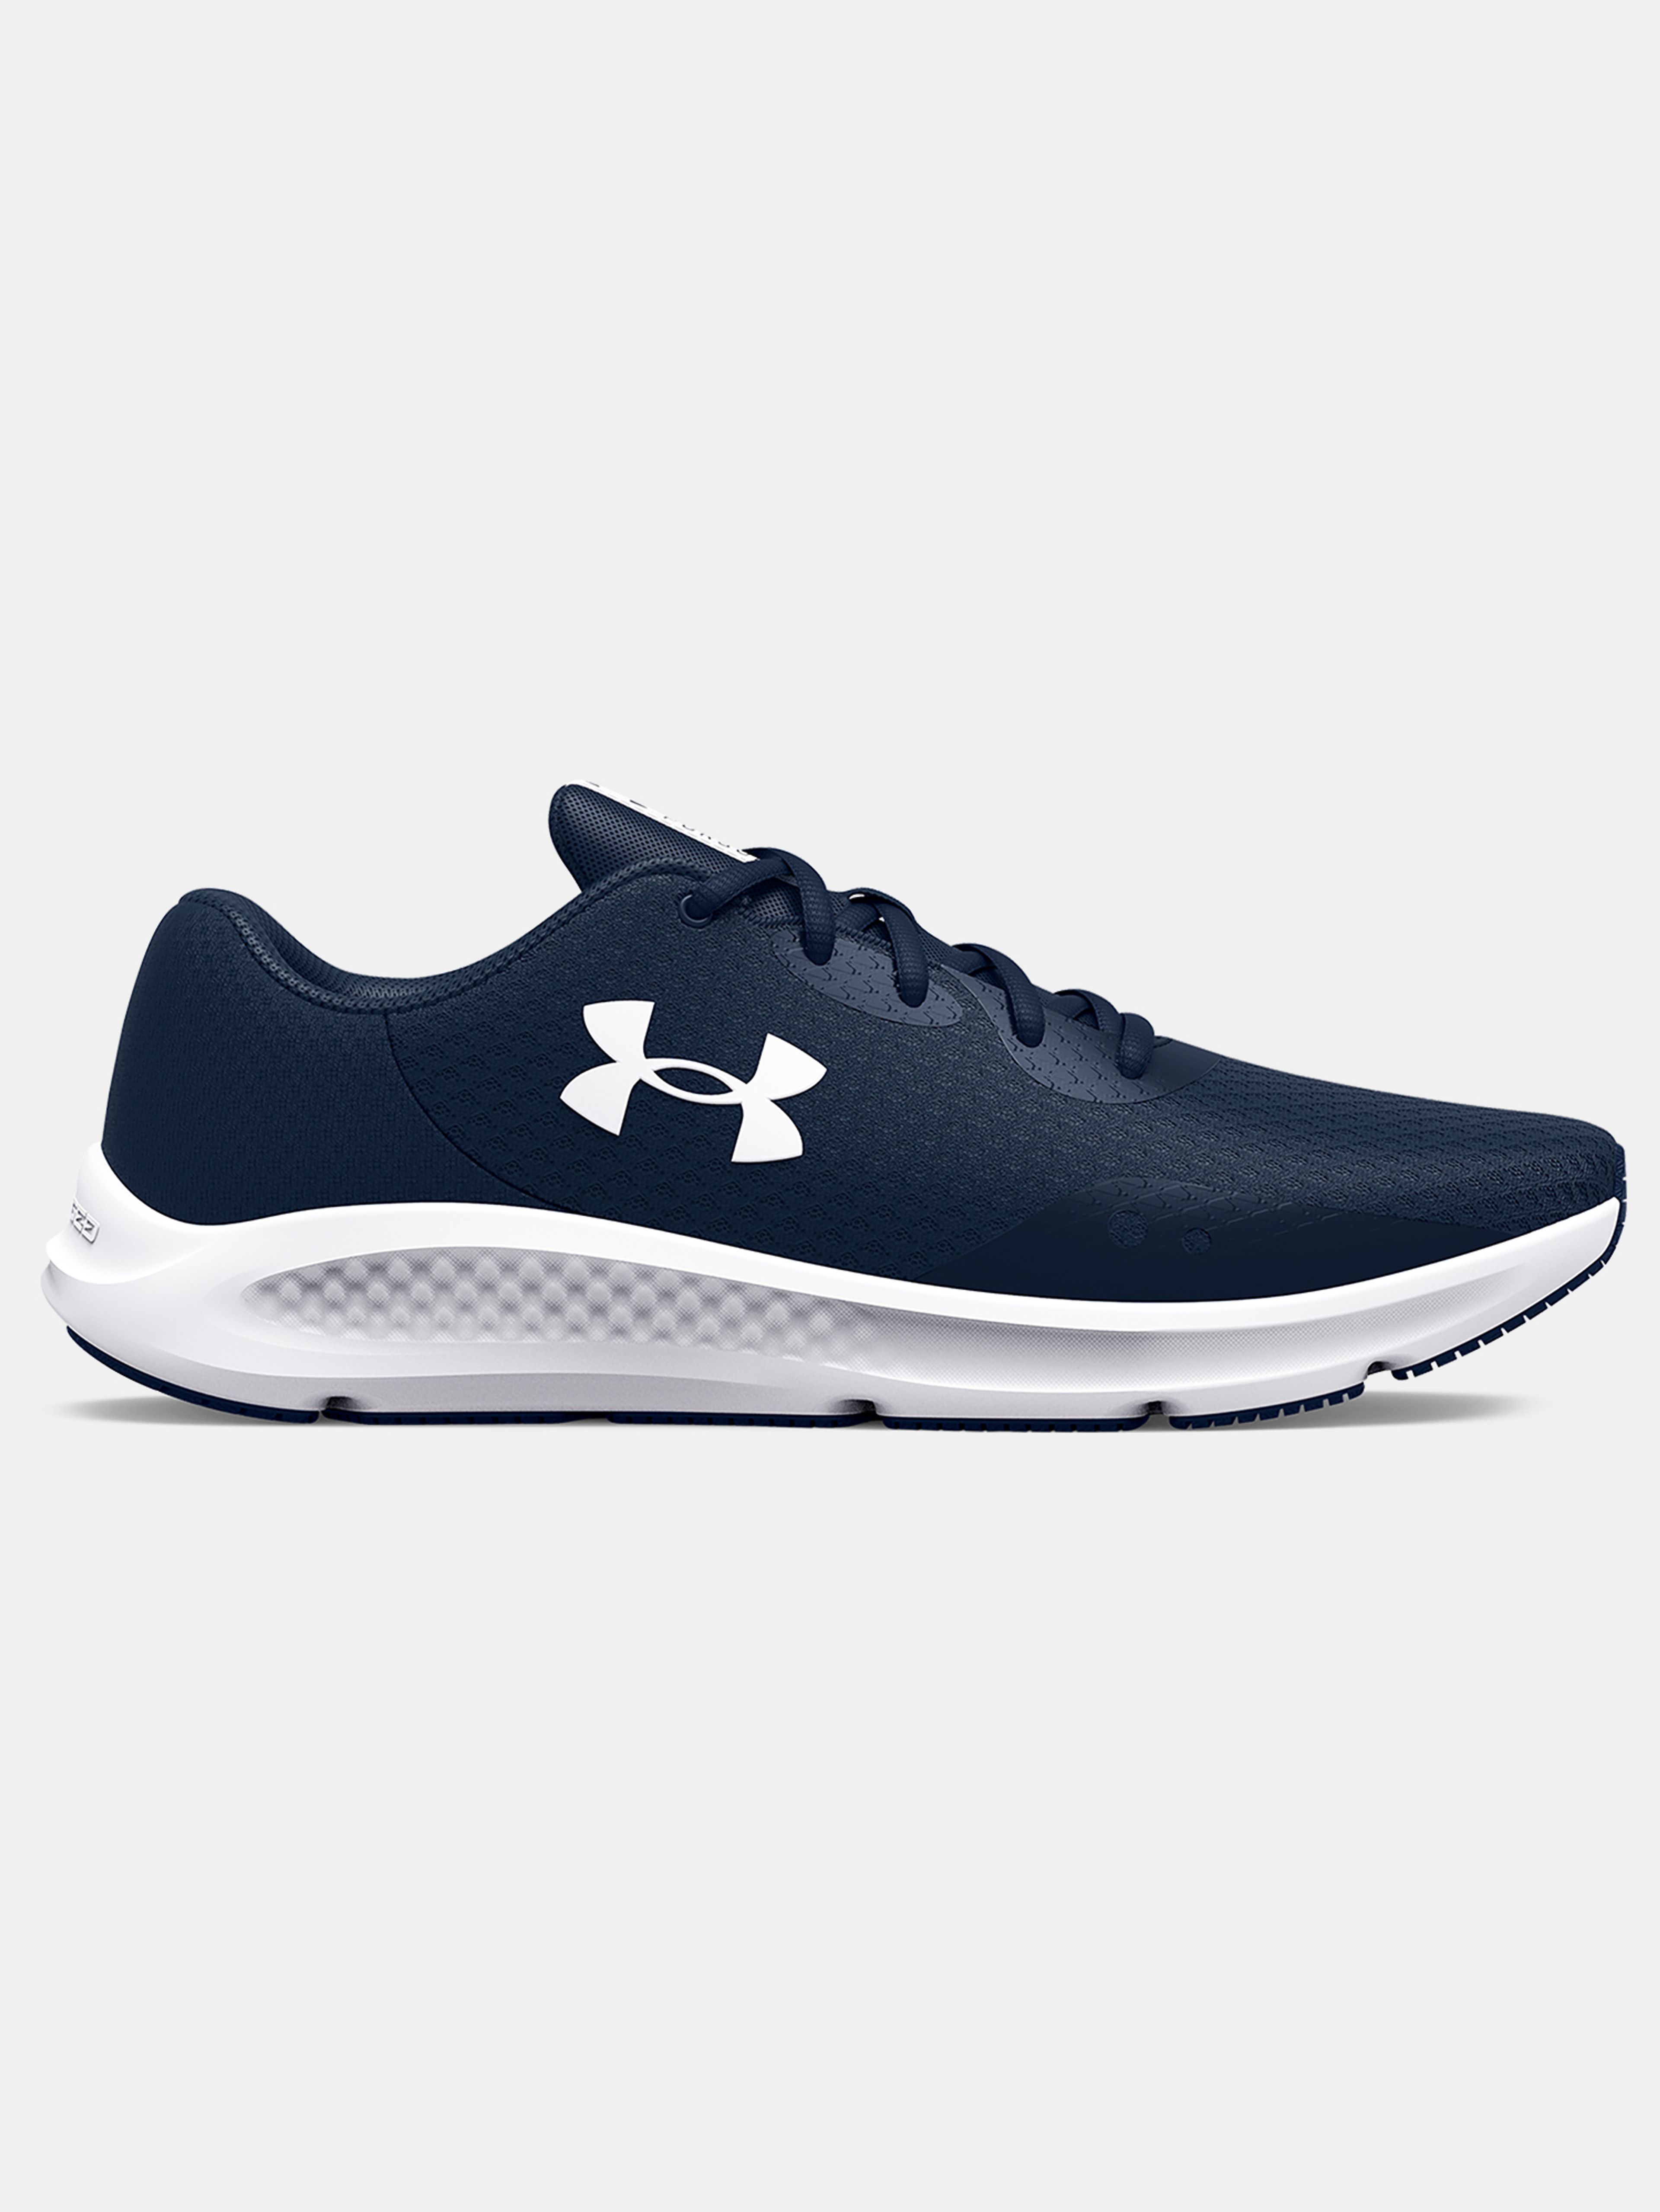 Boty Under Armour UA Charged Pursuit 3-BLU